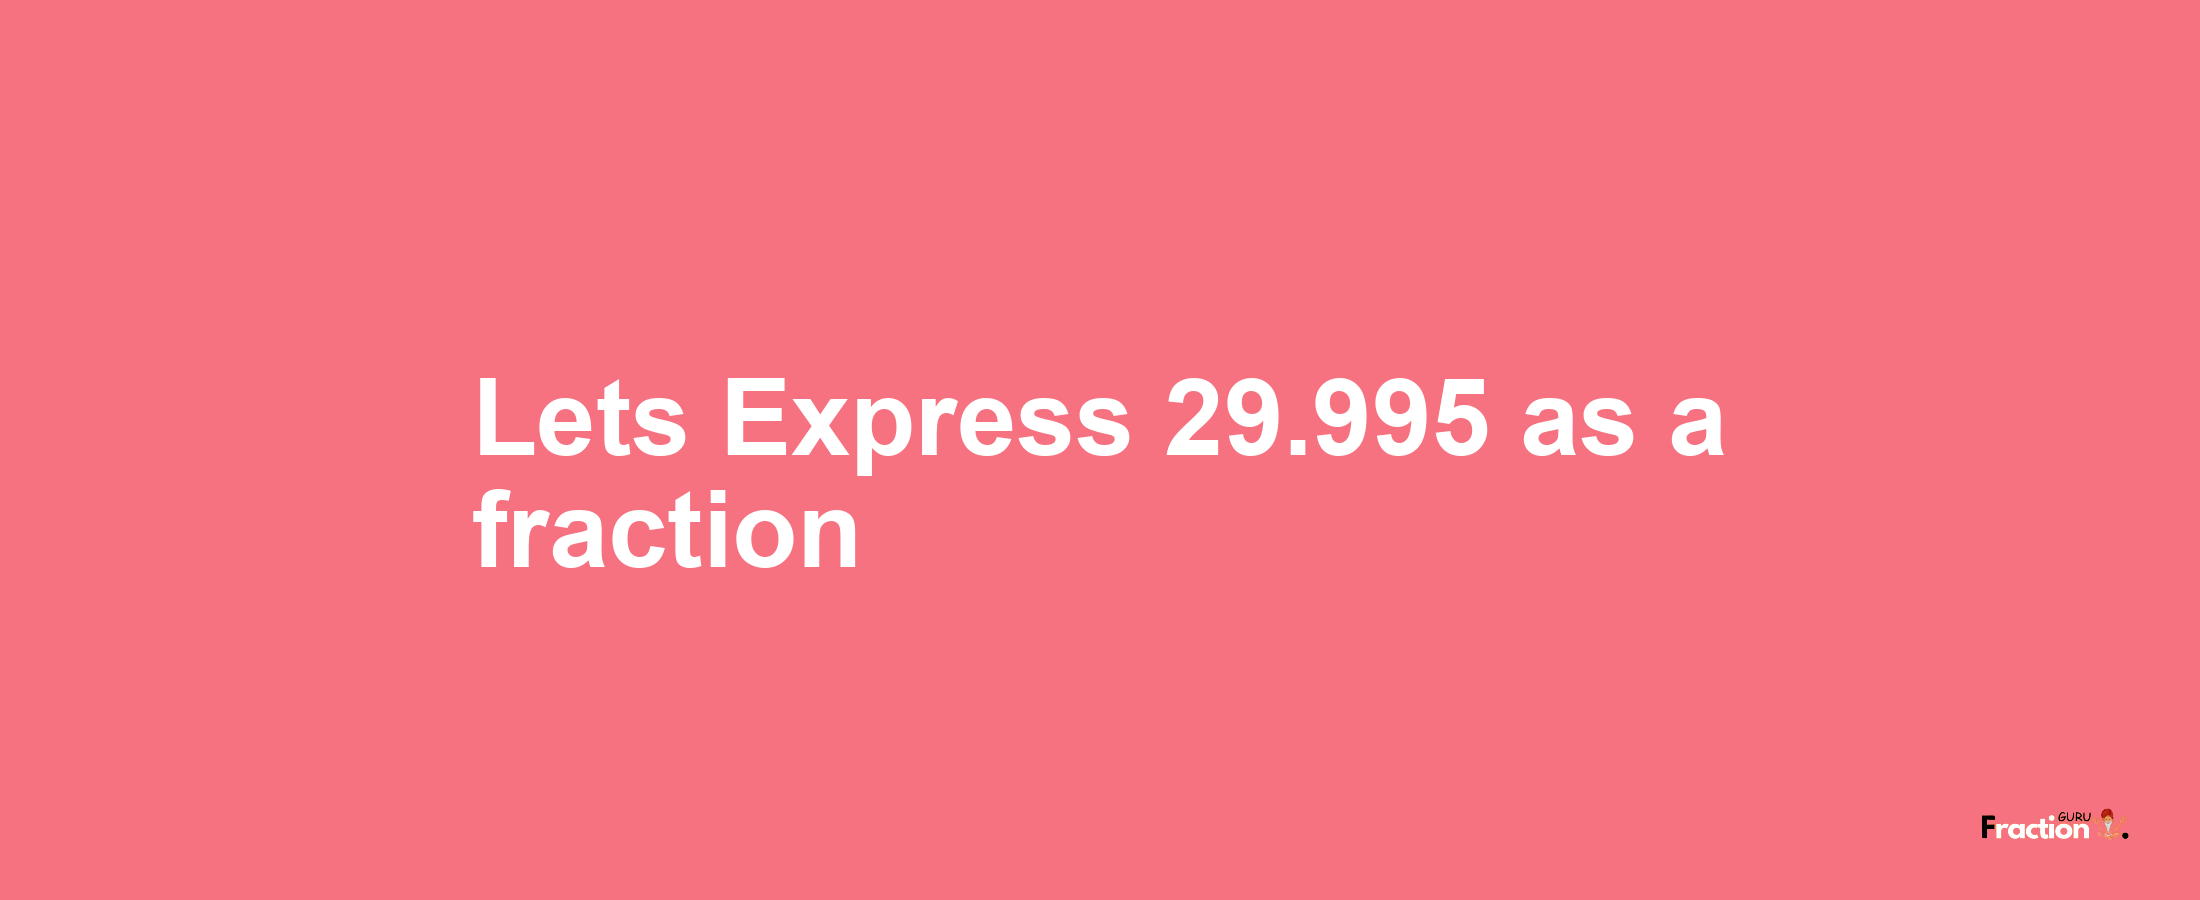 Lets Express 29.995 as afraction